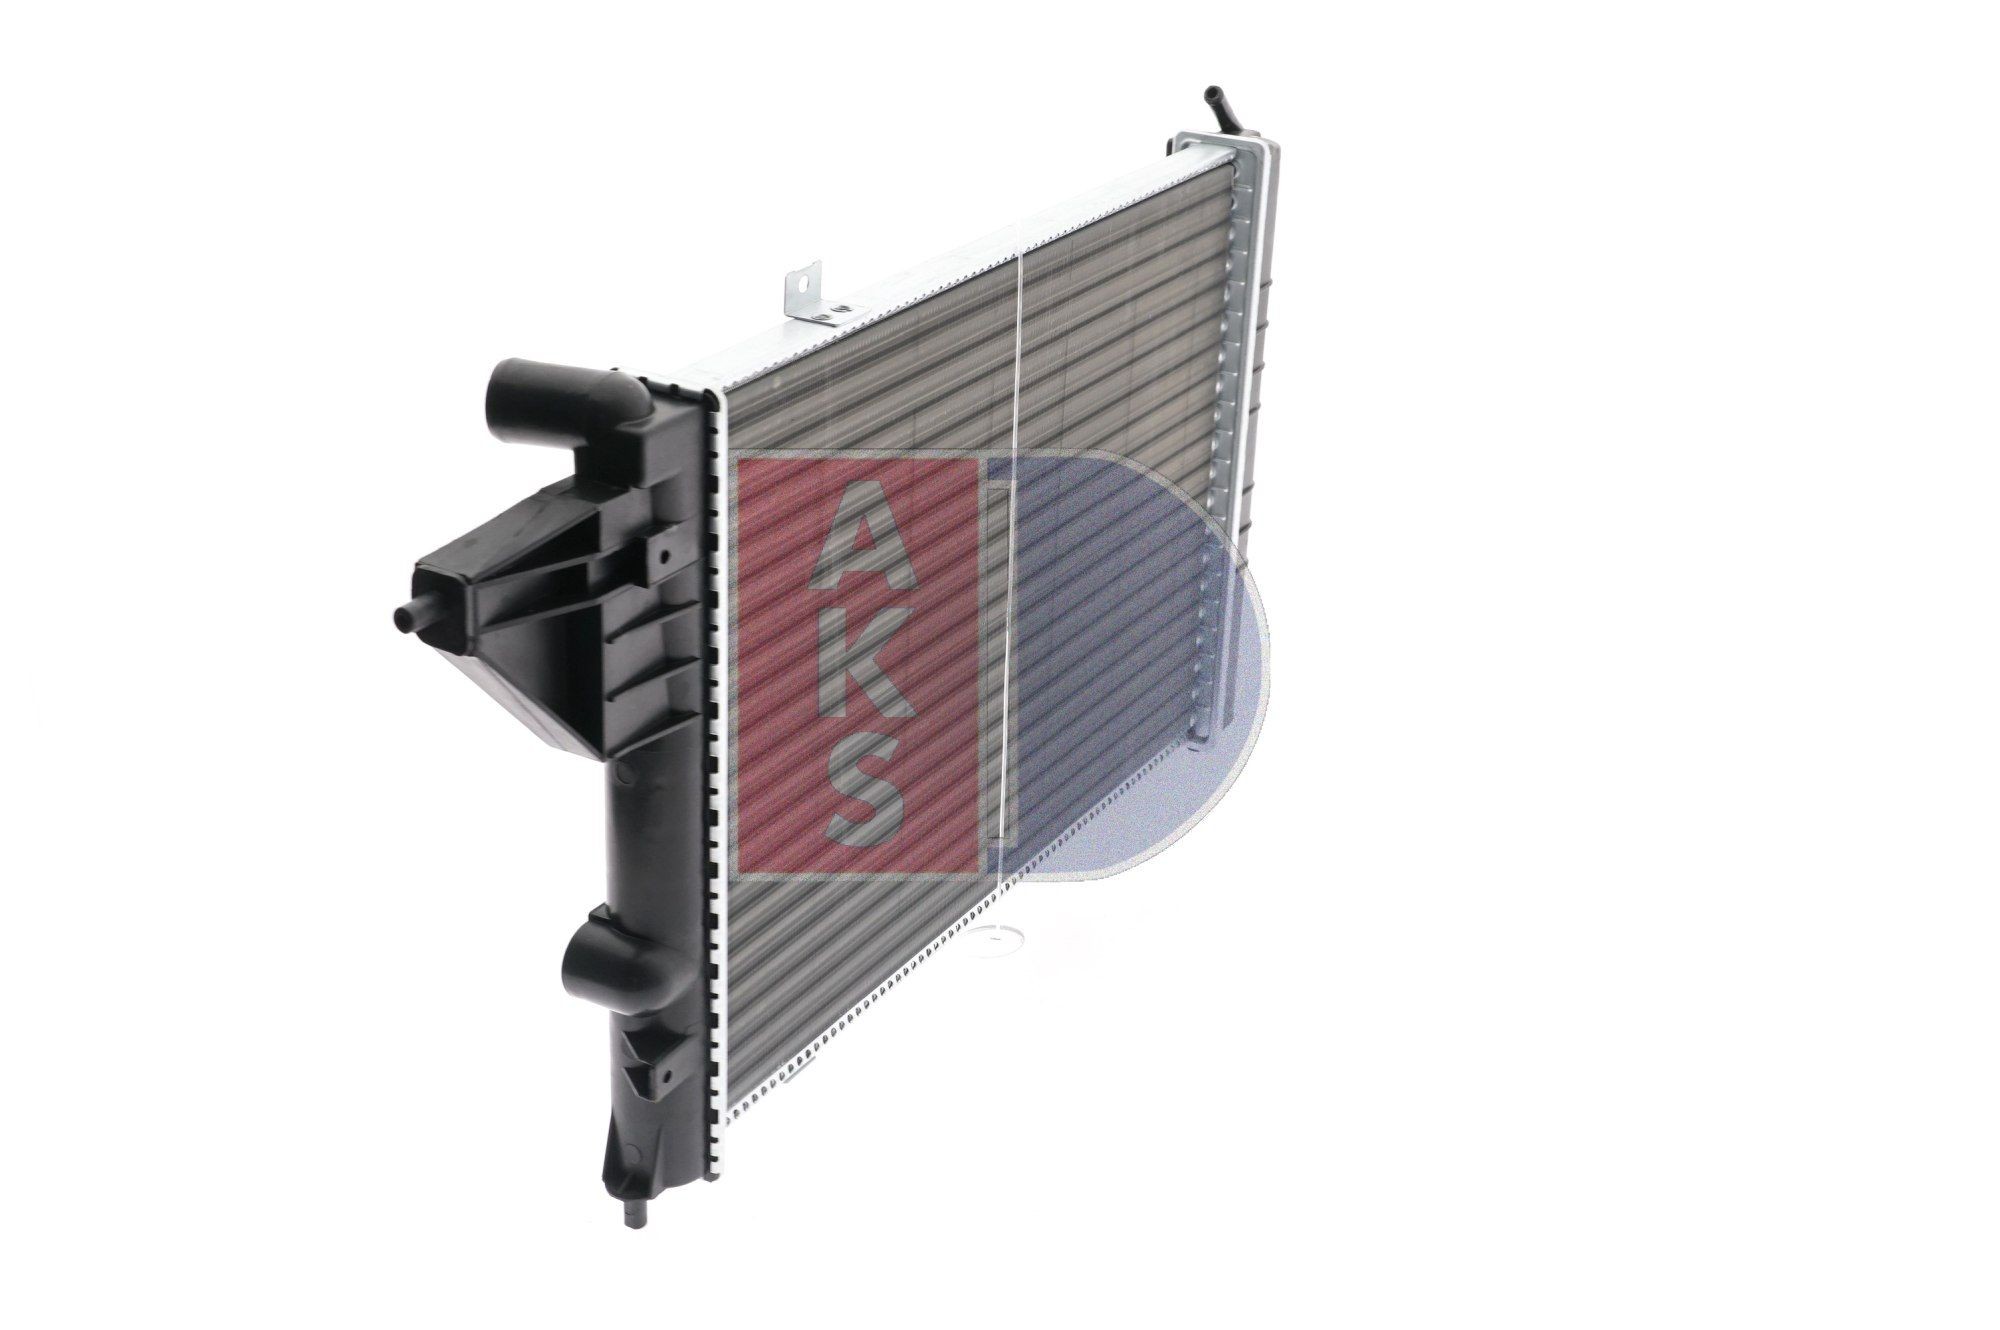 AKS DASIS 150570N Engine radiator 540 x 375 x 22 mm, Mechanically jointed cooling fins